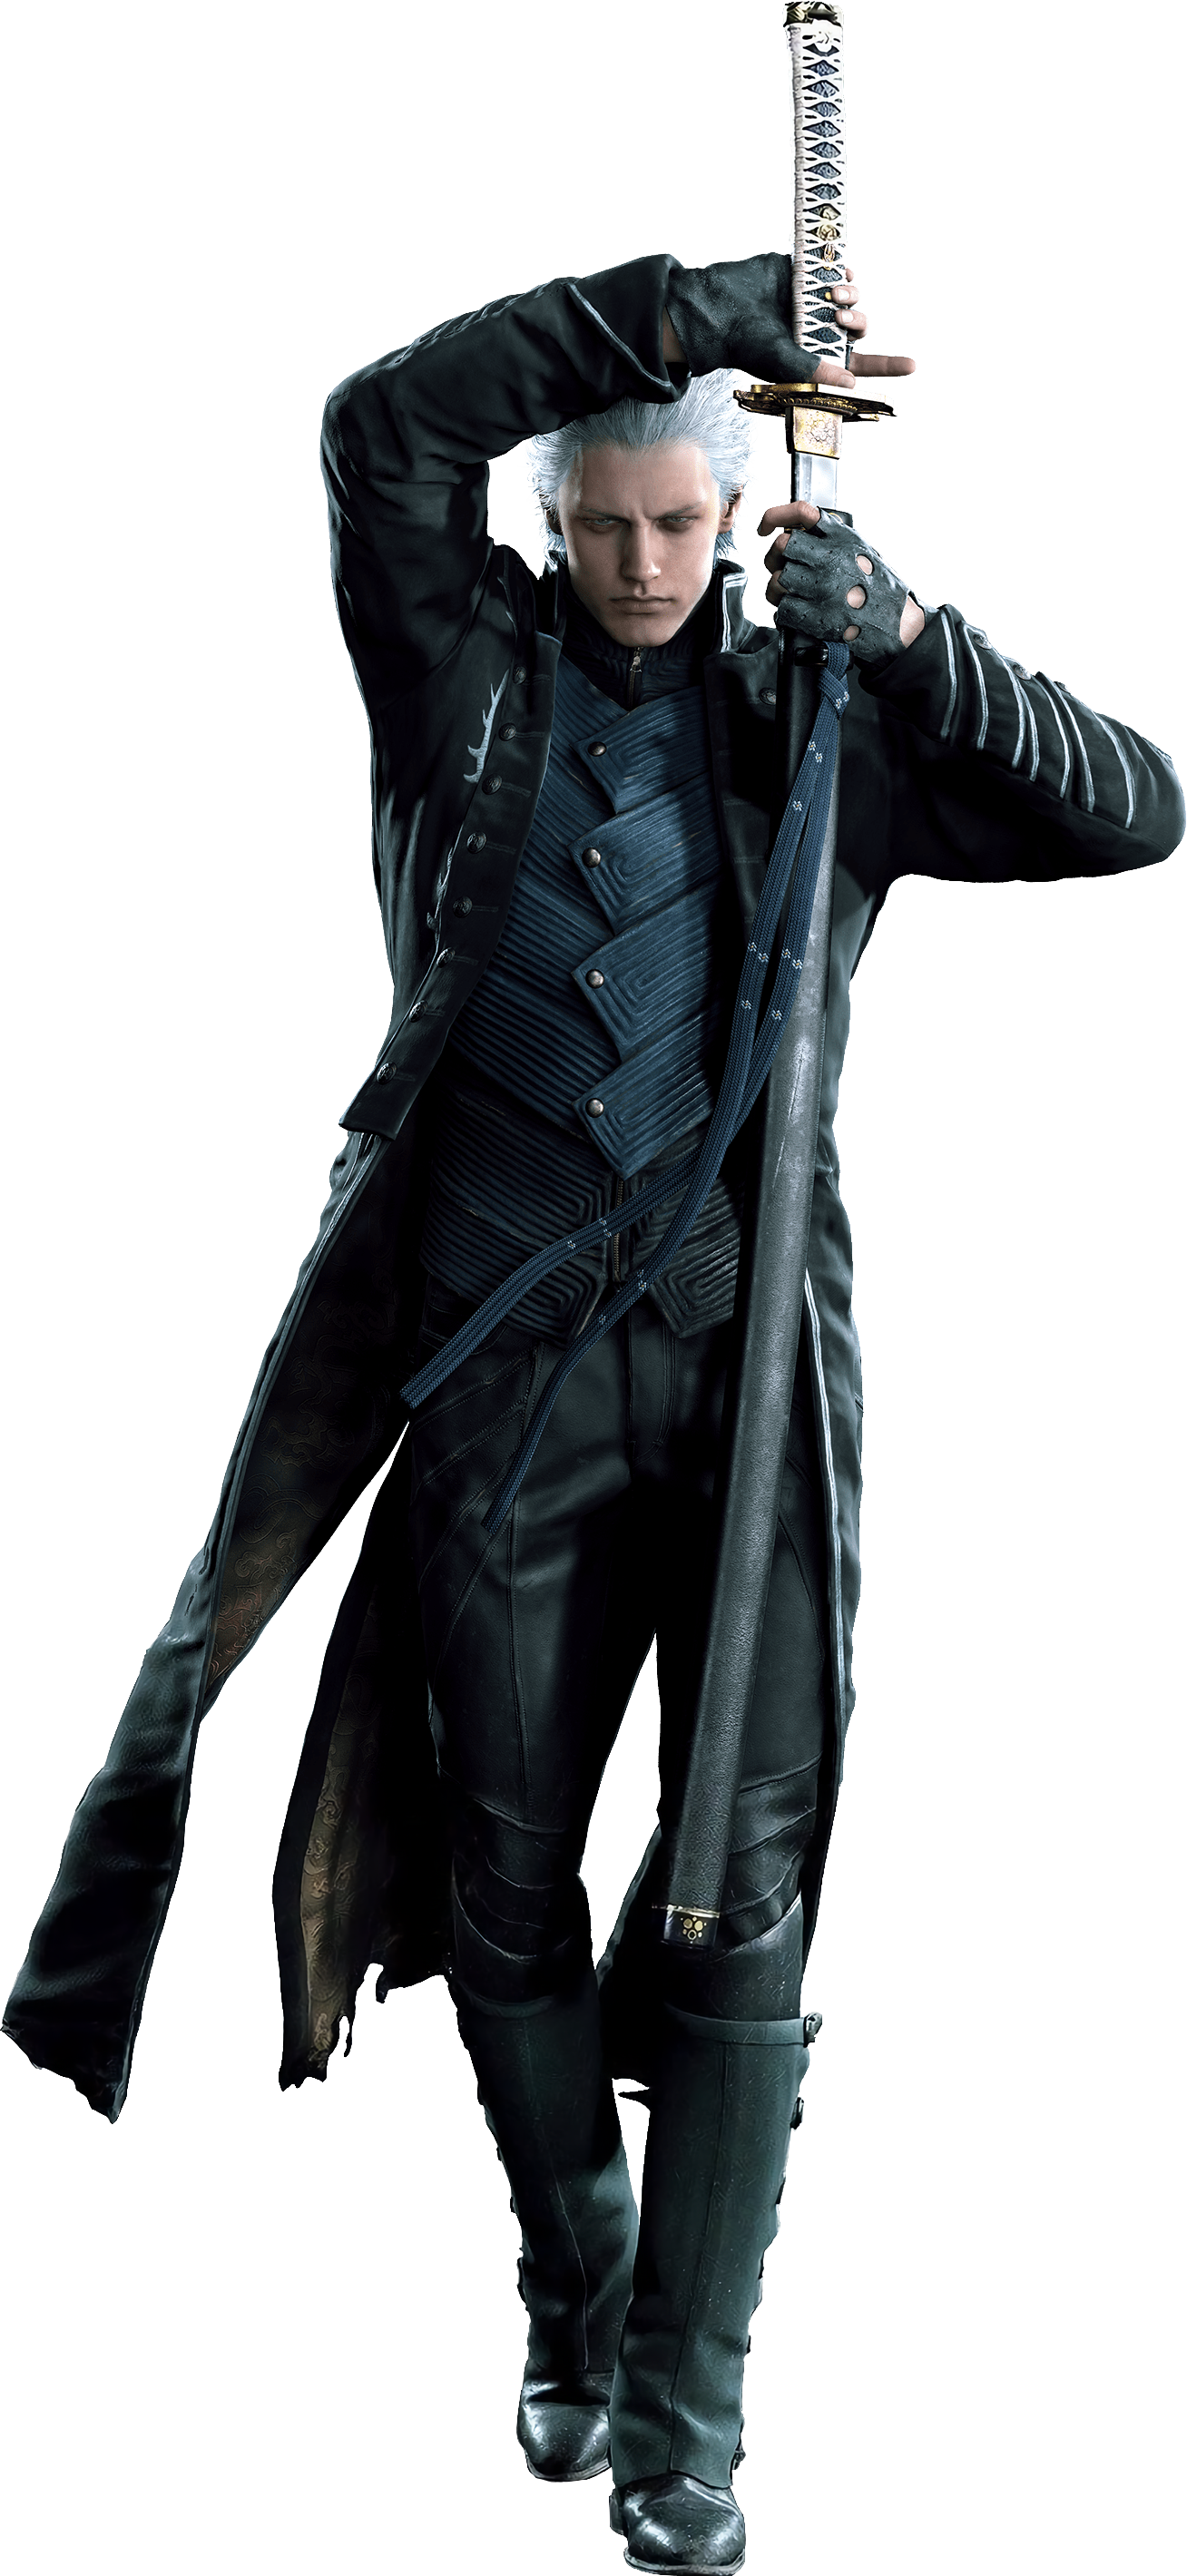 Devil May Cry 5 DMC5 Vergil Aged Outfit Cosplay Halloween Costume Full Set